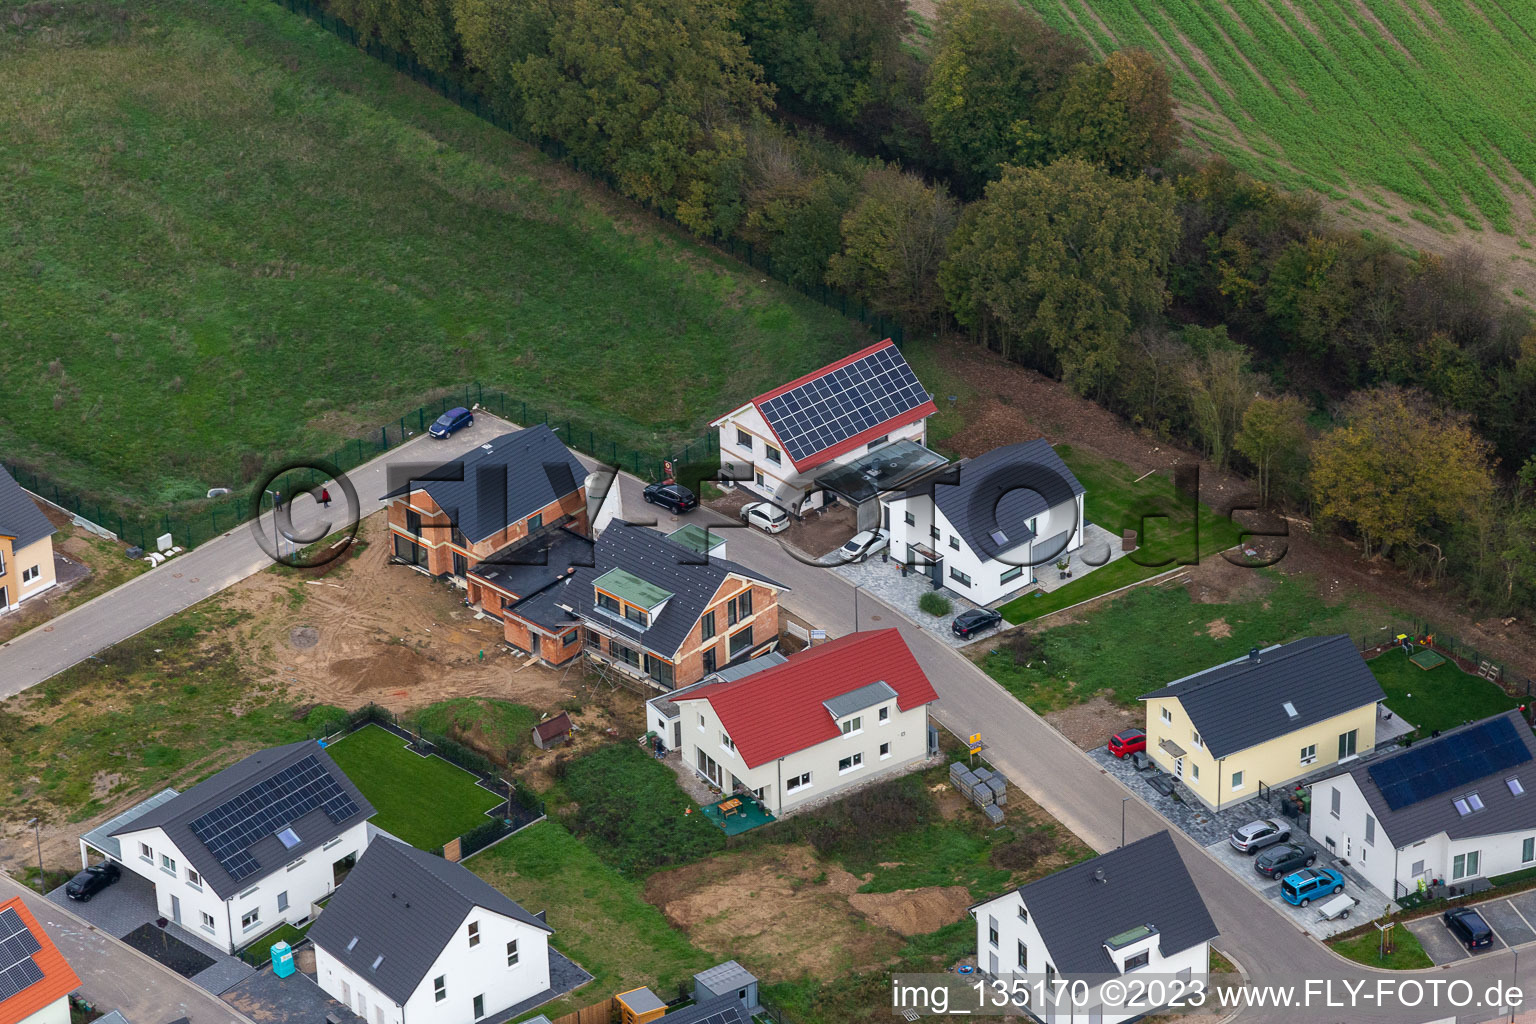 New development area K2 in Kandel in the state Rhineland-Palatinate, Germany from the drone perspective